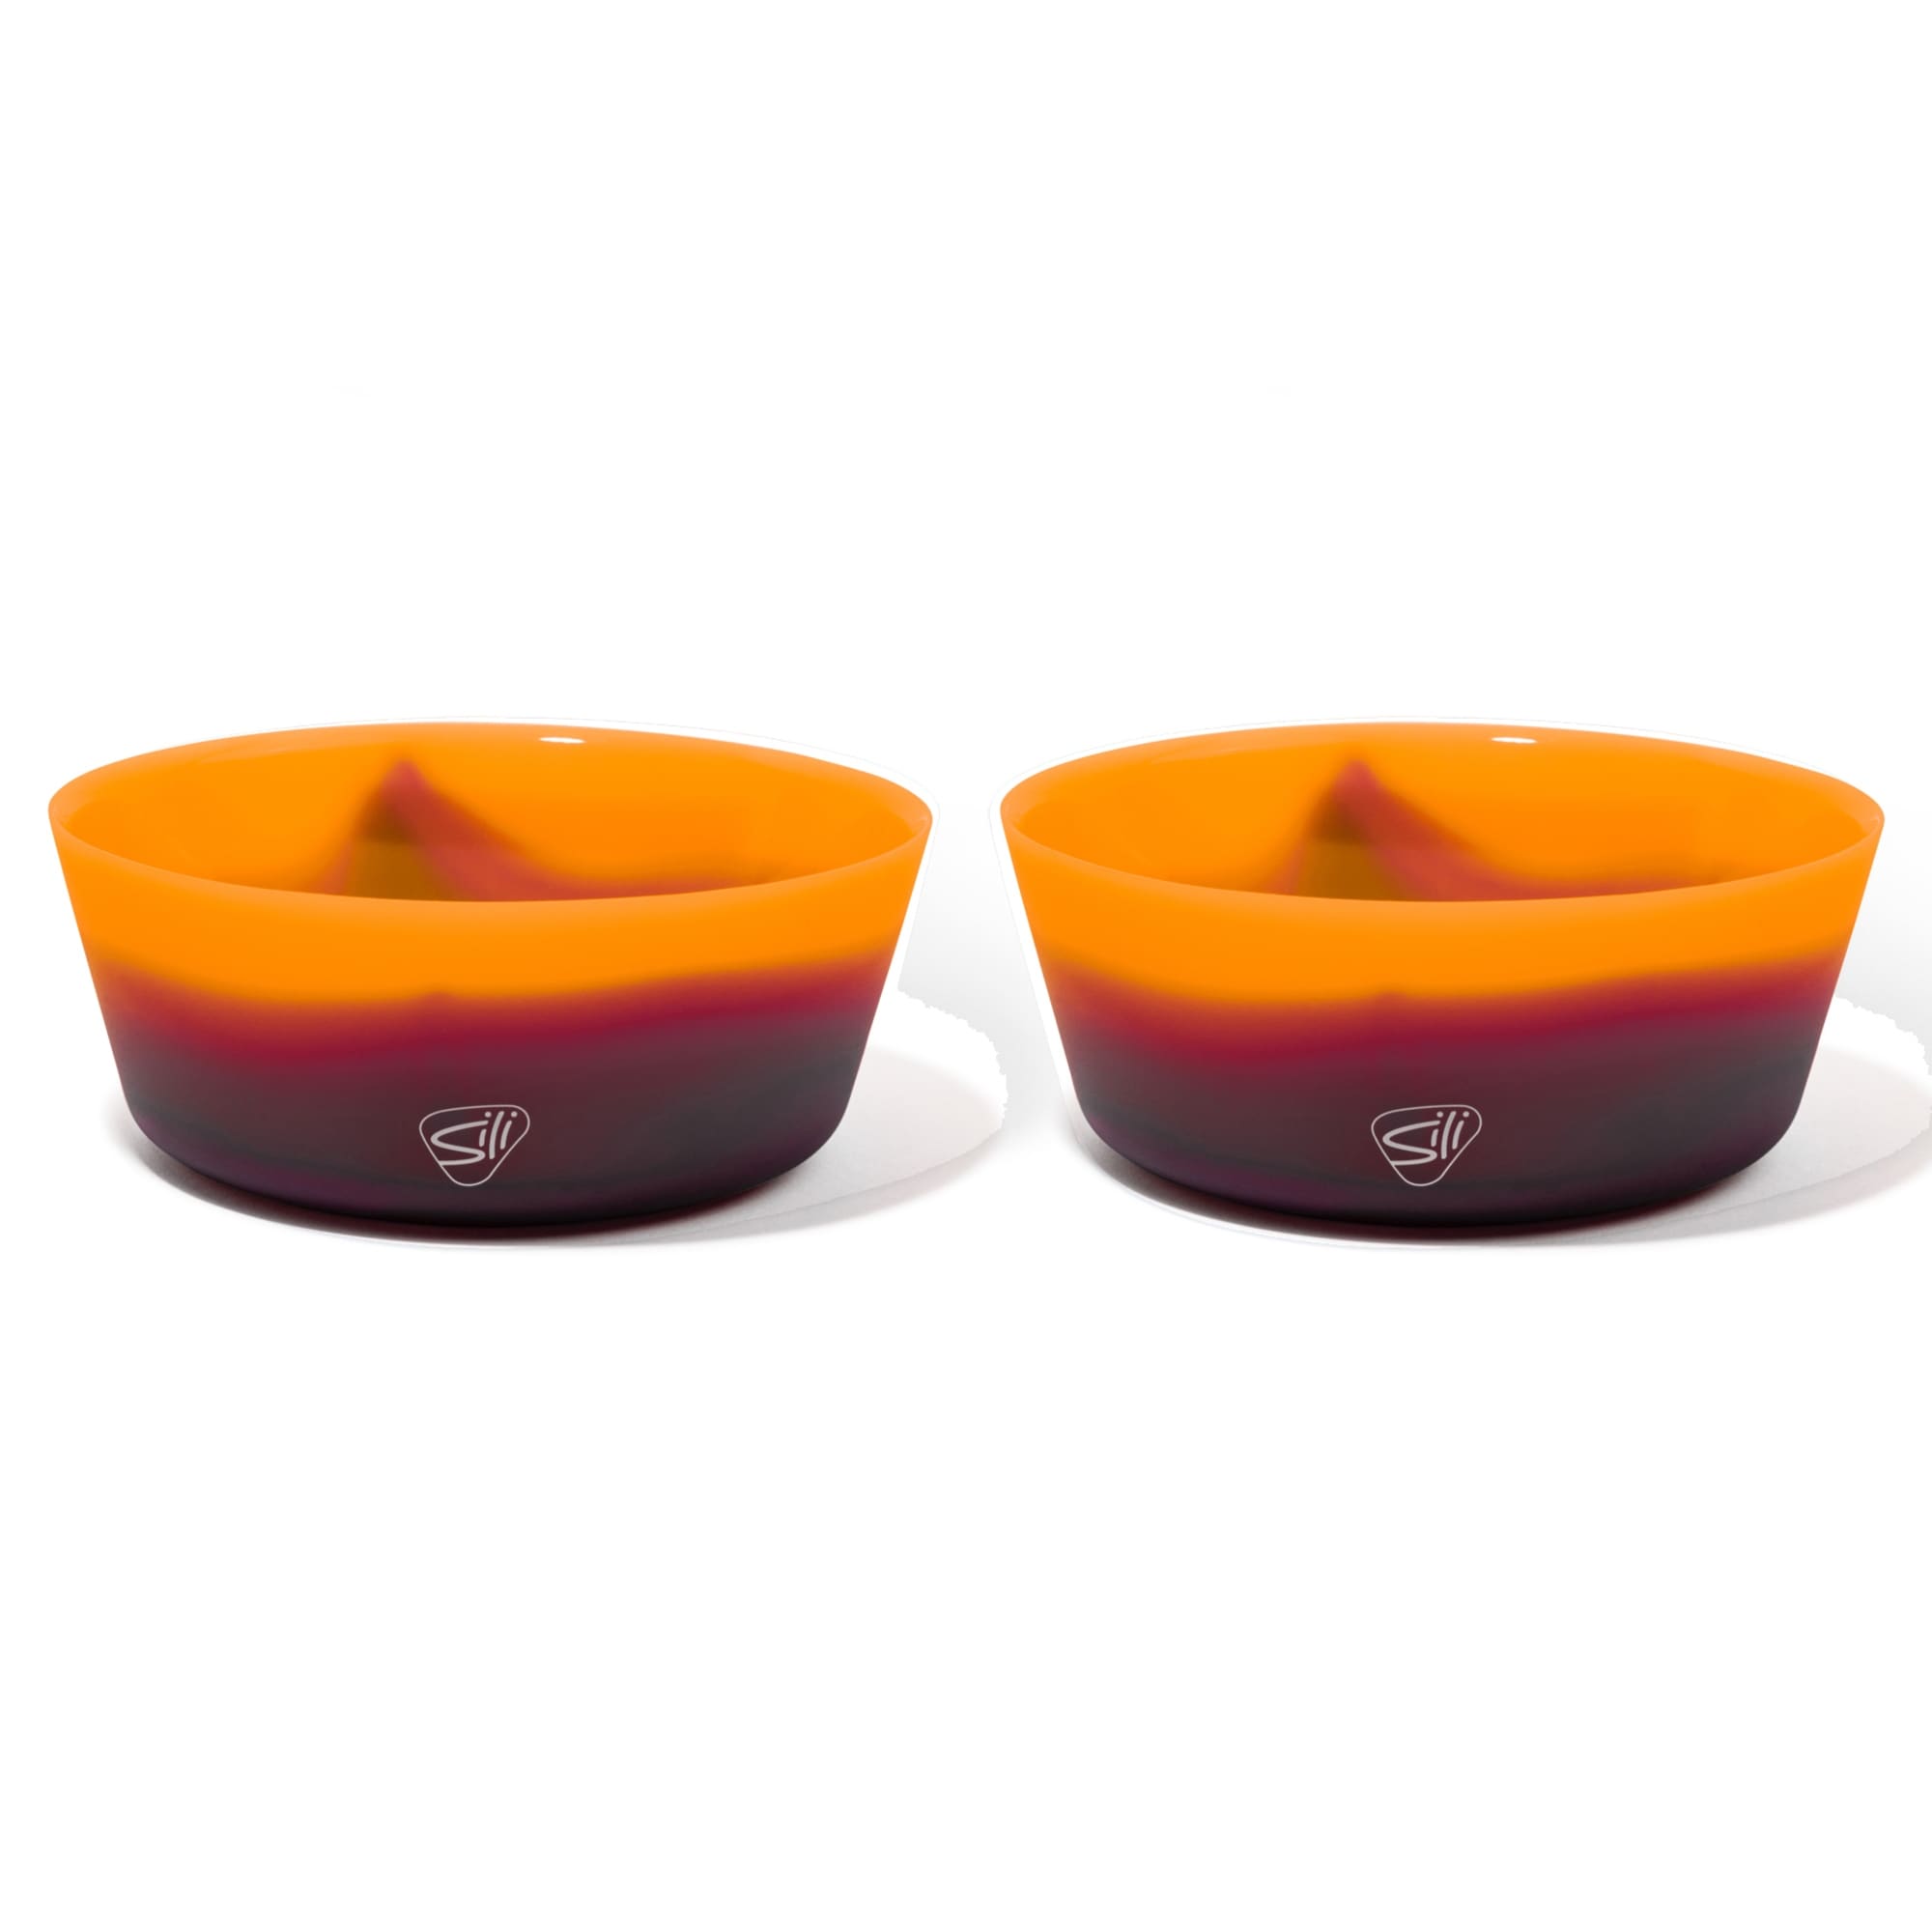 Silipint: Silicone 18oz Squeeze-A-Bowl Set of 2: Sun Storm - Microwavable, Flexible, Unbreakable, Non-Slip, Easy Grip